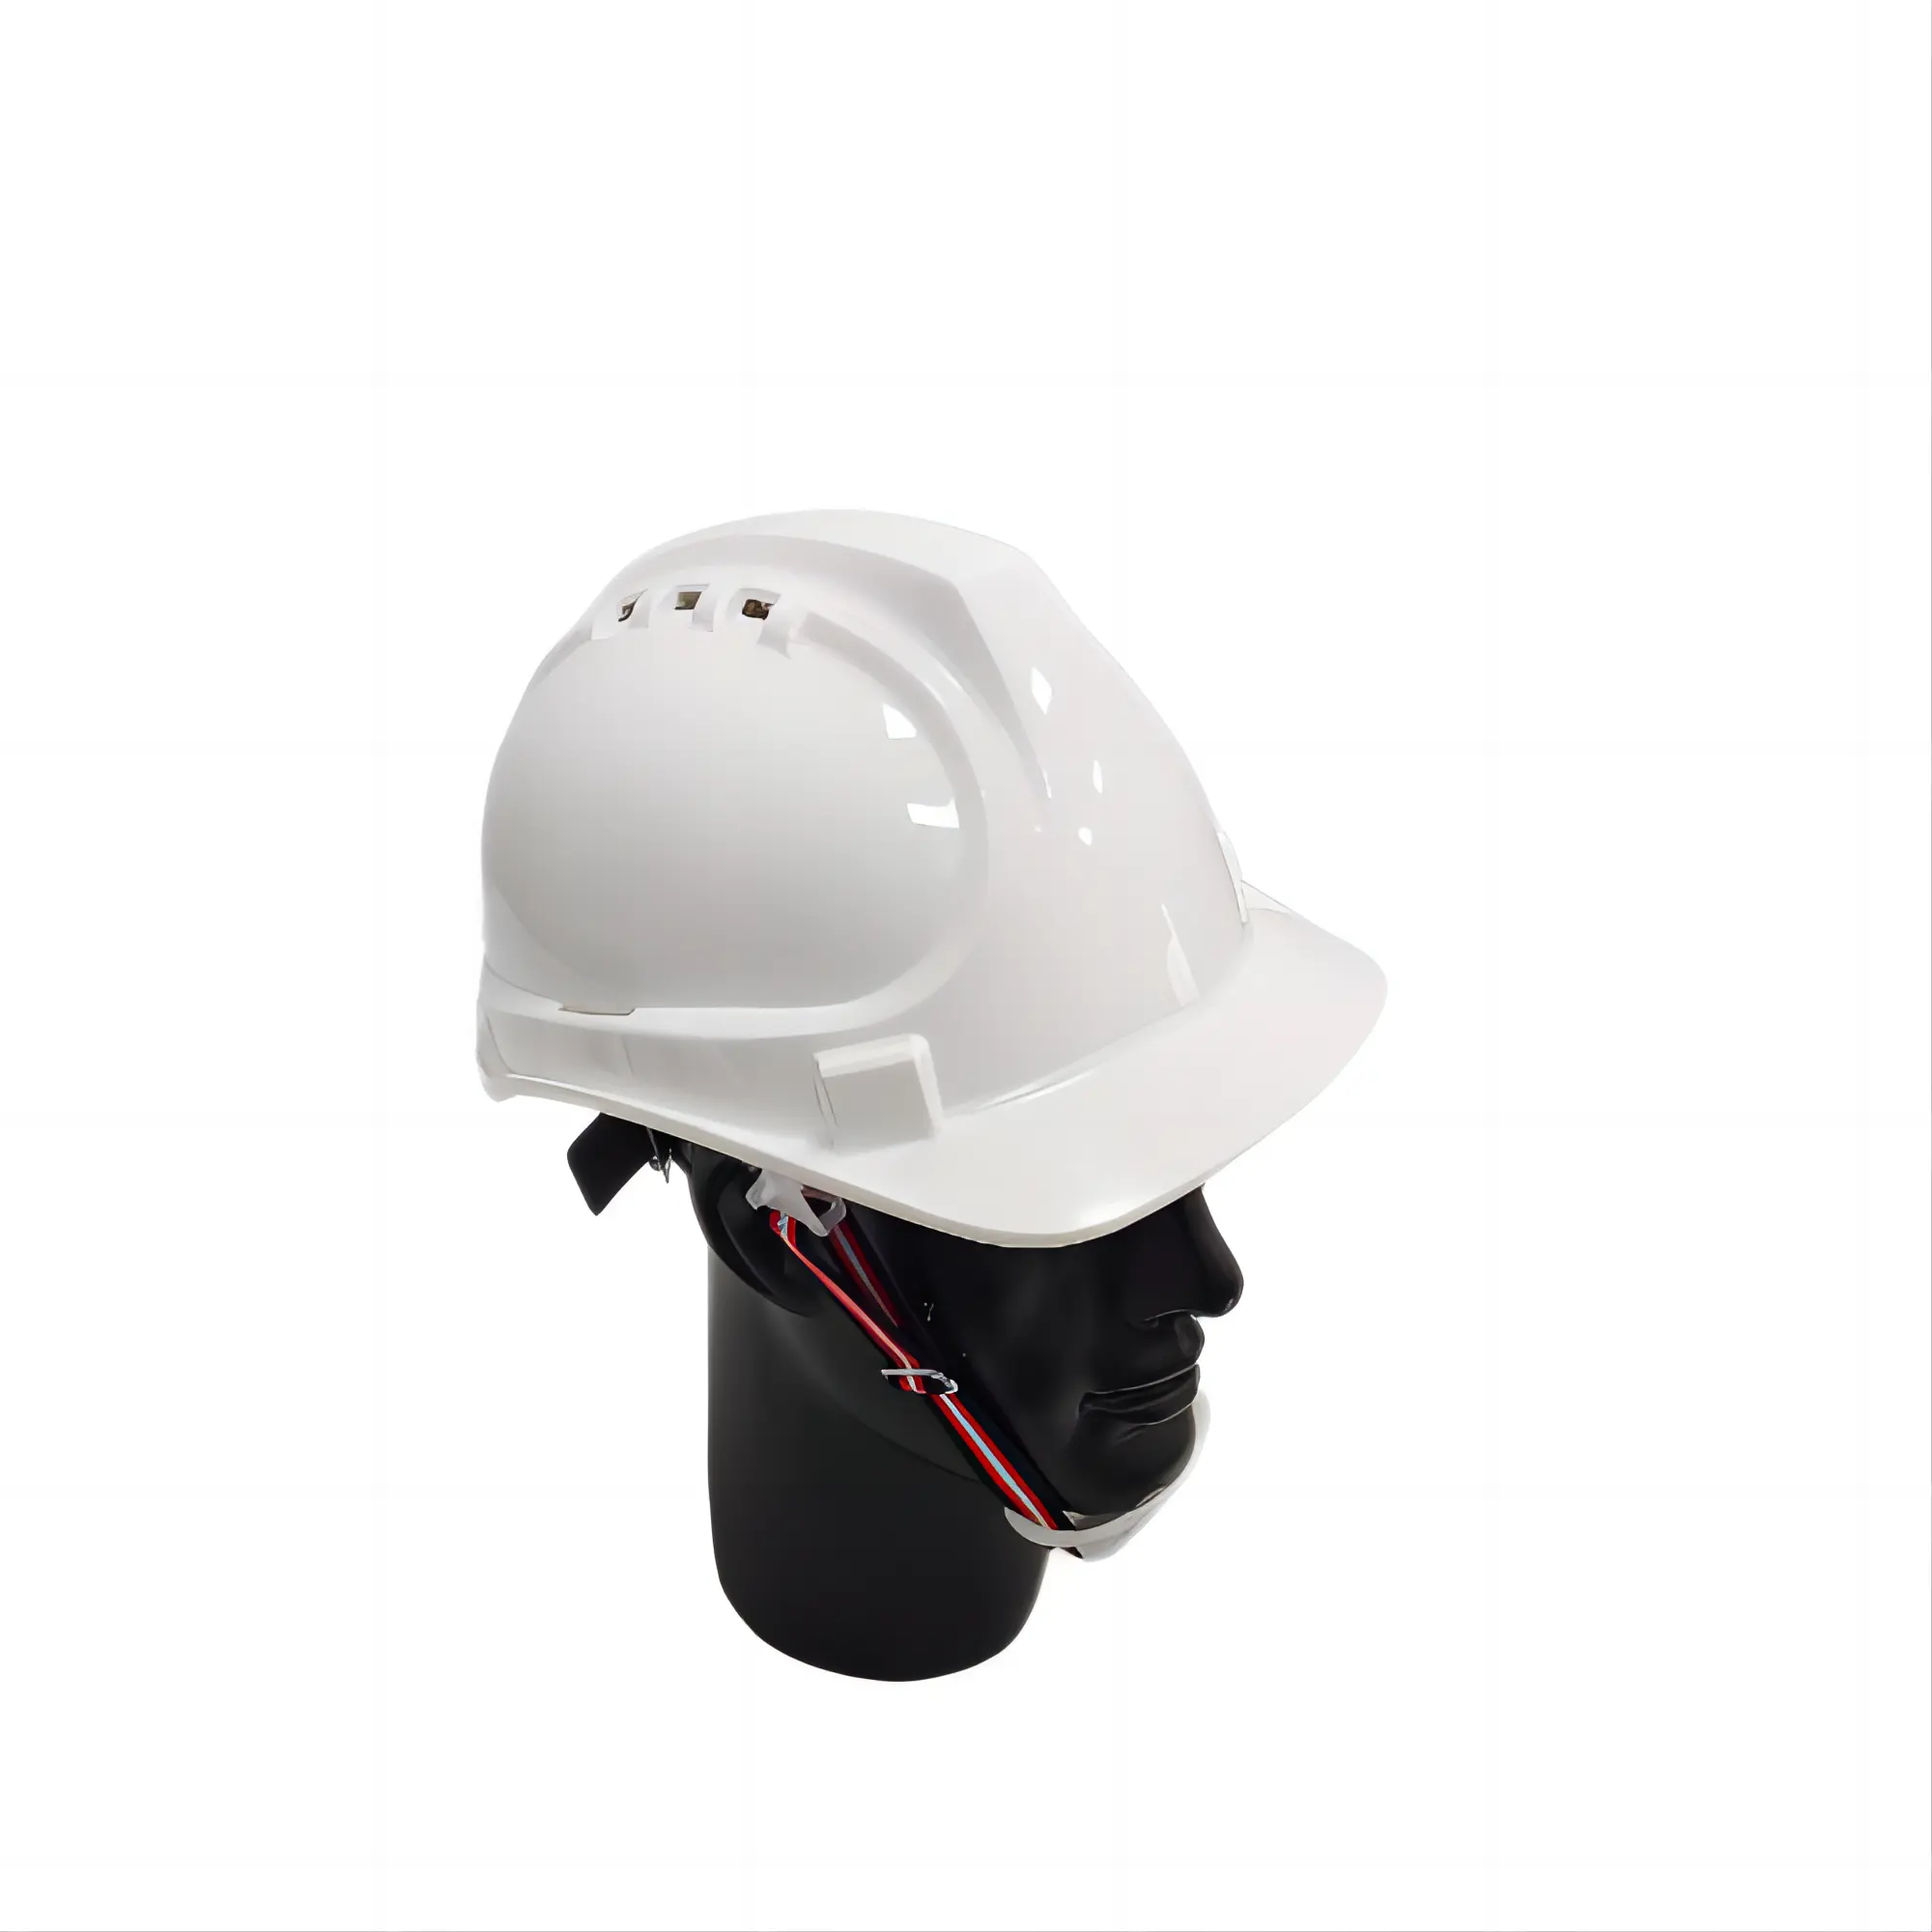 White Jiangsu China Aurora Safety-helmet-with-ce-certificate Iso Safety Helmet Construction Hard Hats